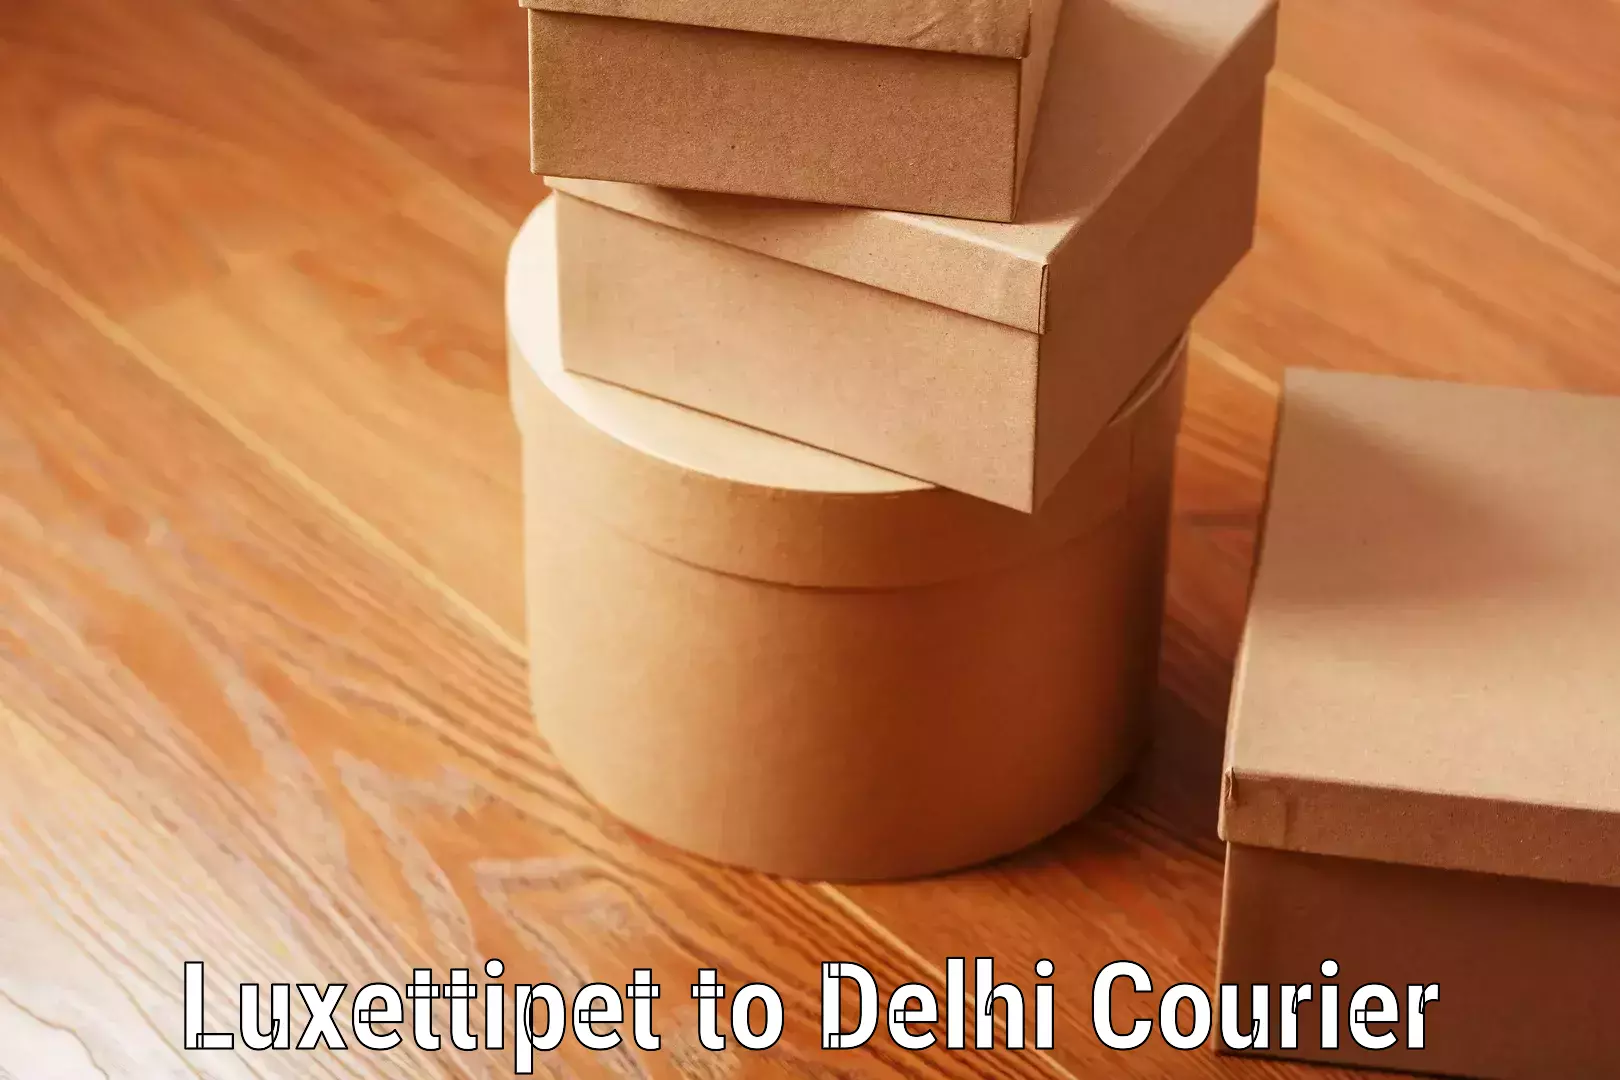 Airport luggage delivery Luxettipet to Delhi